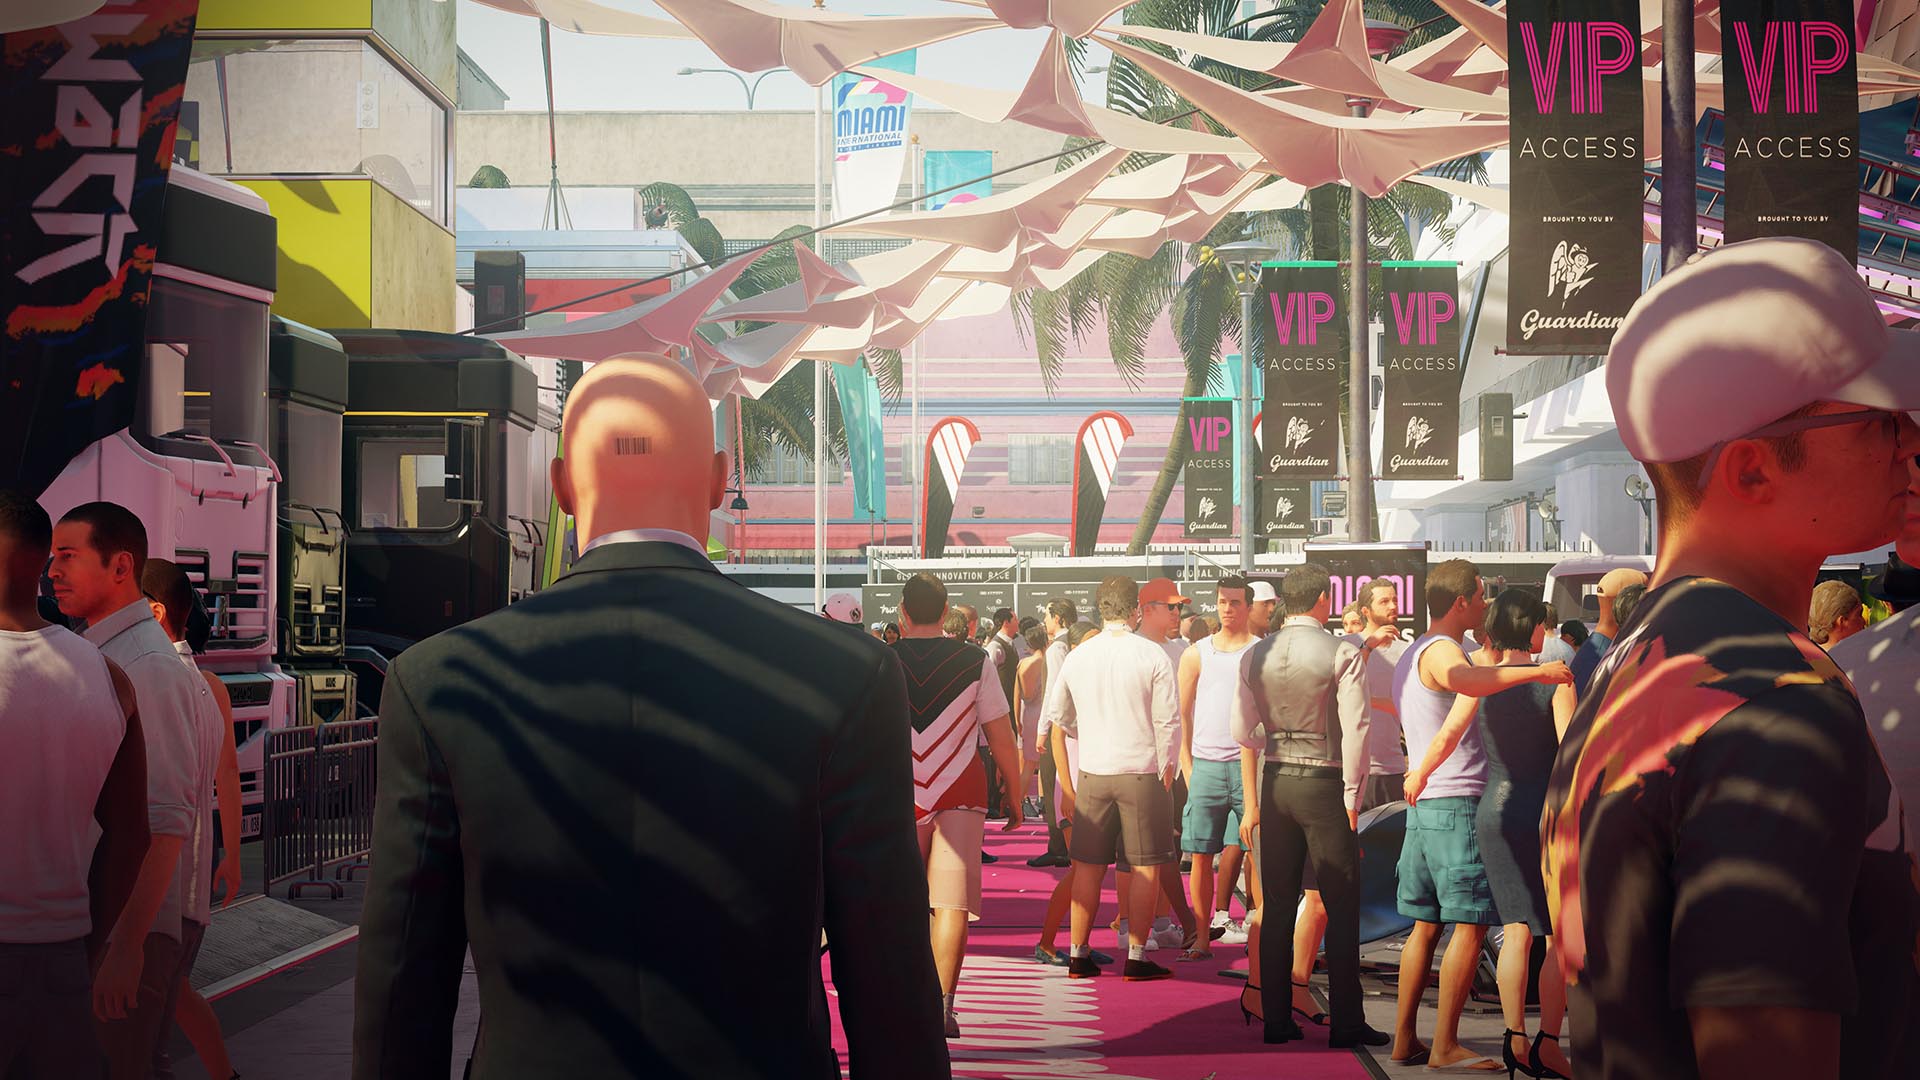 hitman 2 ps4 for sale